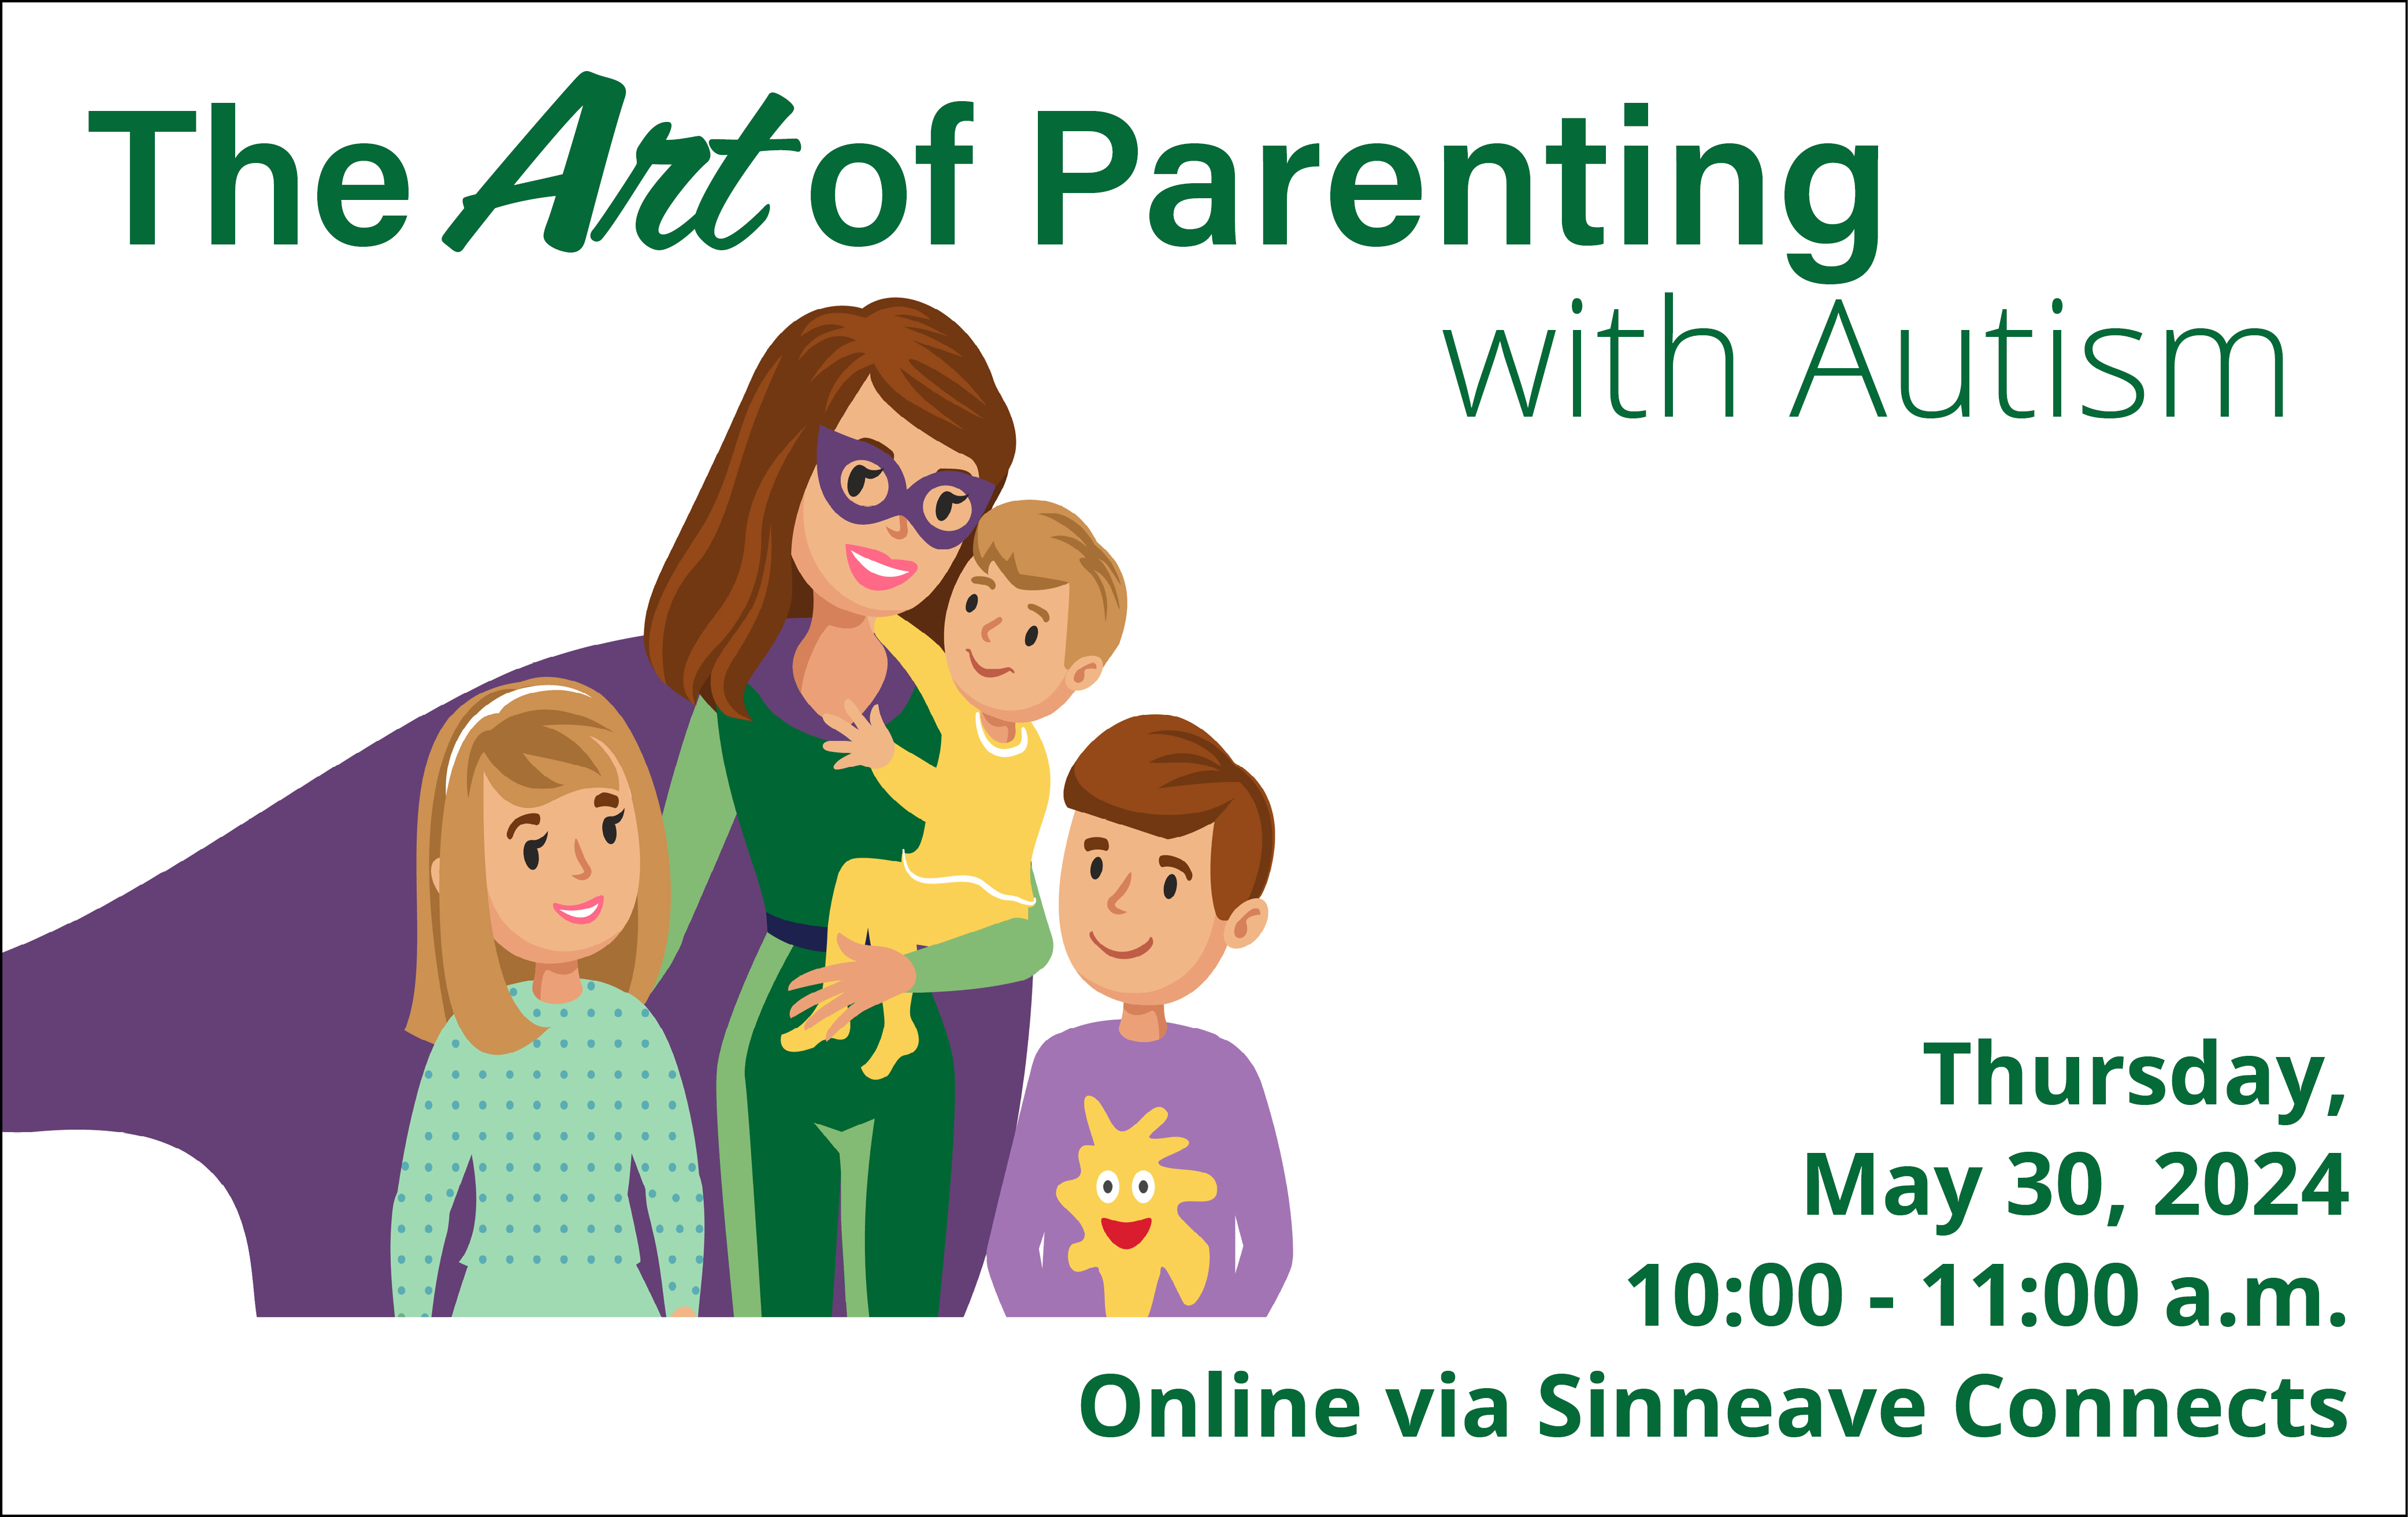 On a white background, in the top of the image reads, "The Art of Parenting with Autism". Below it is a vector graphic showing a mother with three children by her side. On the right, the text says, "Thursday, May 30, 2024. 10:00 - 11:00 am. Online Via Sinneave Connects.